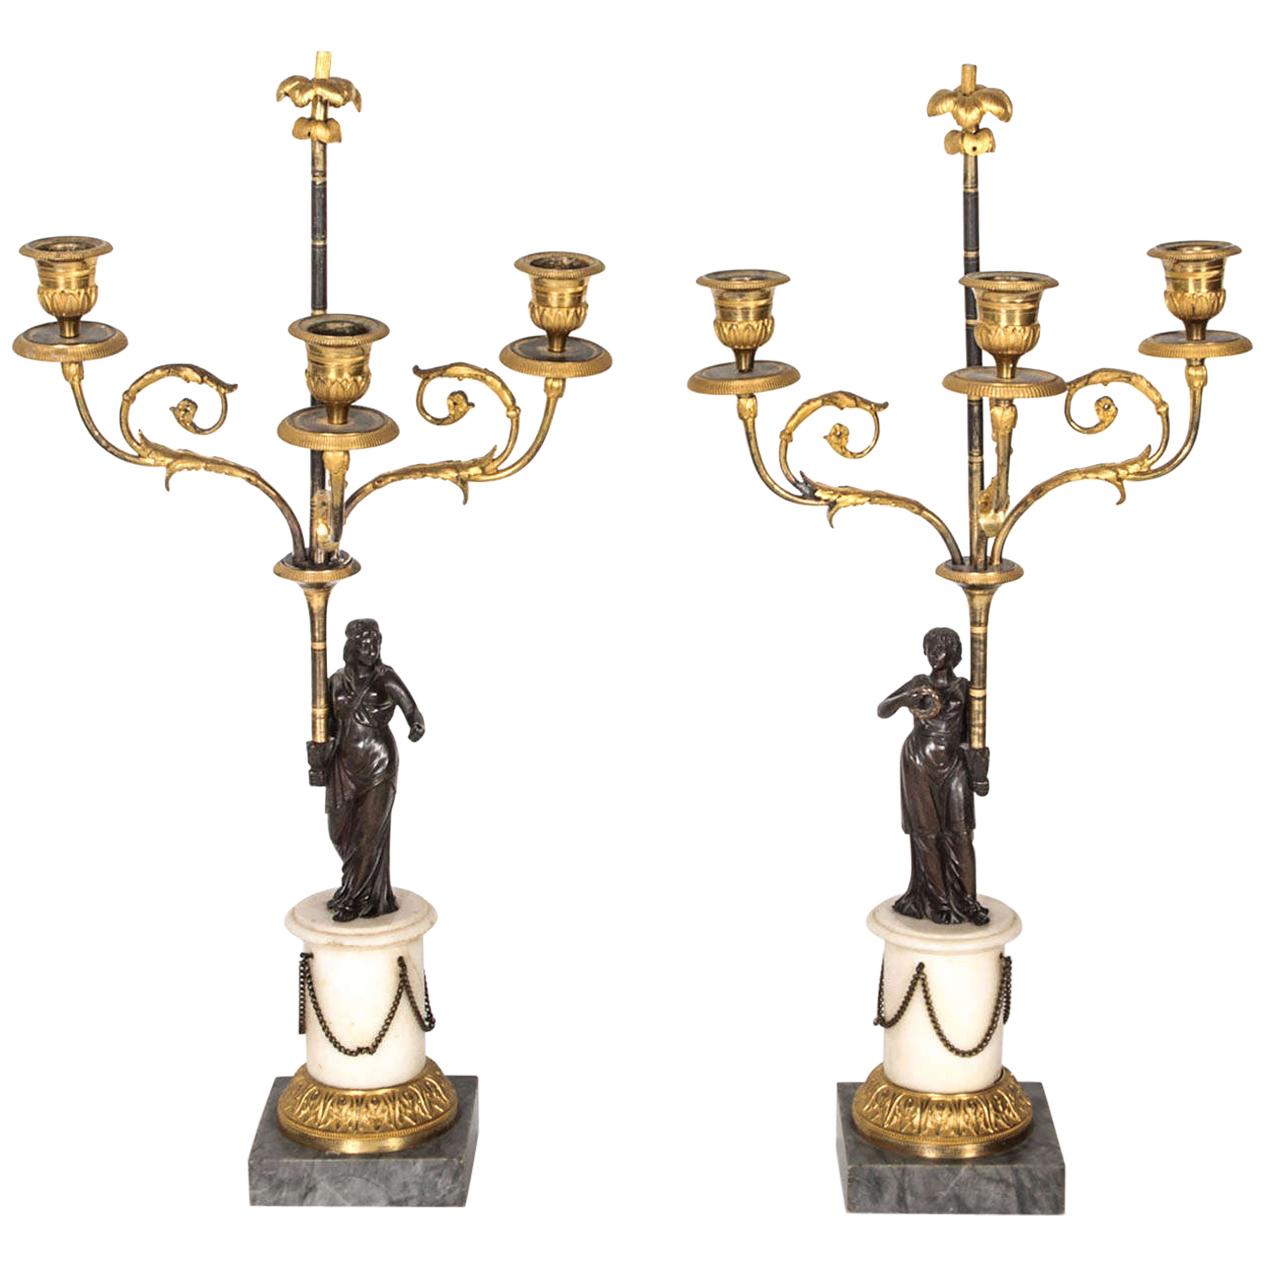 Pair of French 18th Century Ormulu Gilded Bronze Candelabra